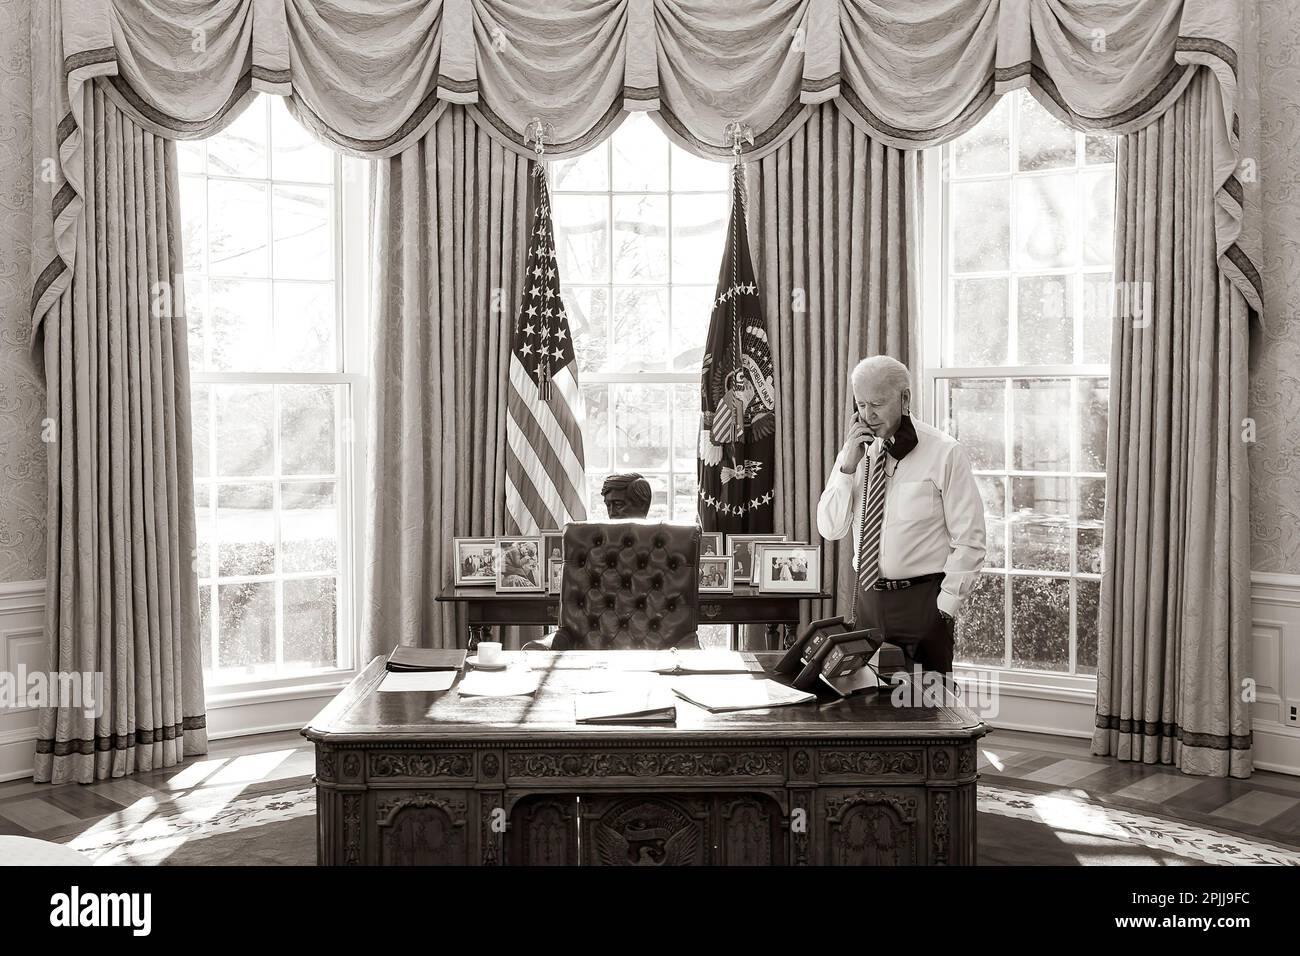 P20210122AS-0386: President Joe Biden talks on the phone with Mexico’s President Andrés Manuel López Obrador Friday, Jan. 22, 2021, in the Oval Office of the White House. (Official White House Photo by Adam Schultz) Stock Photo